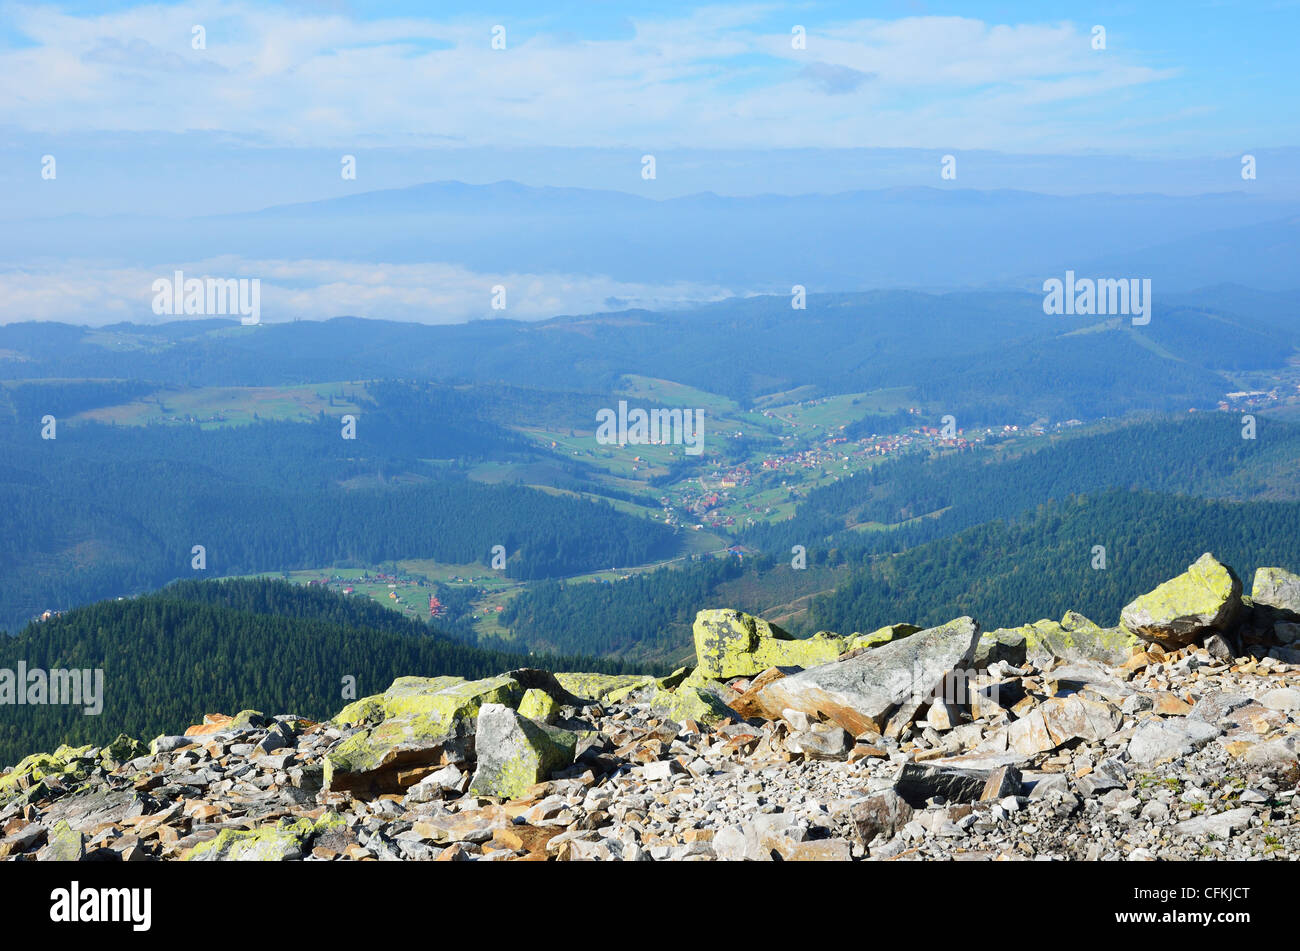 Carpathian Mountains from above. Stock Photo